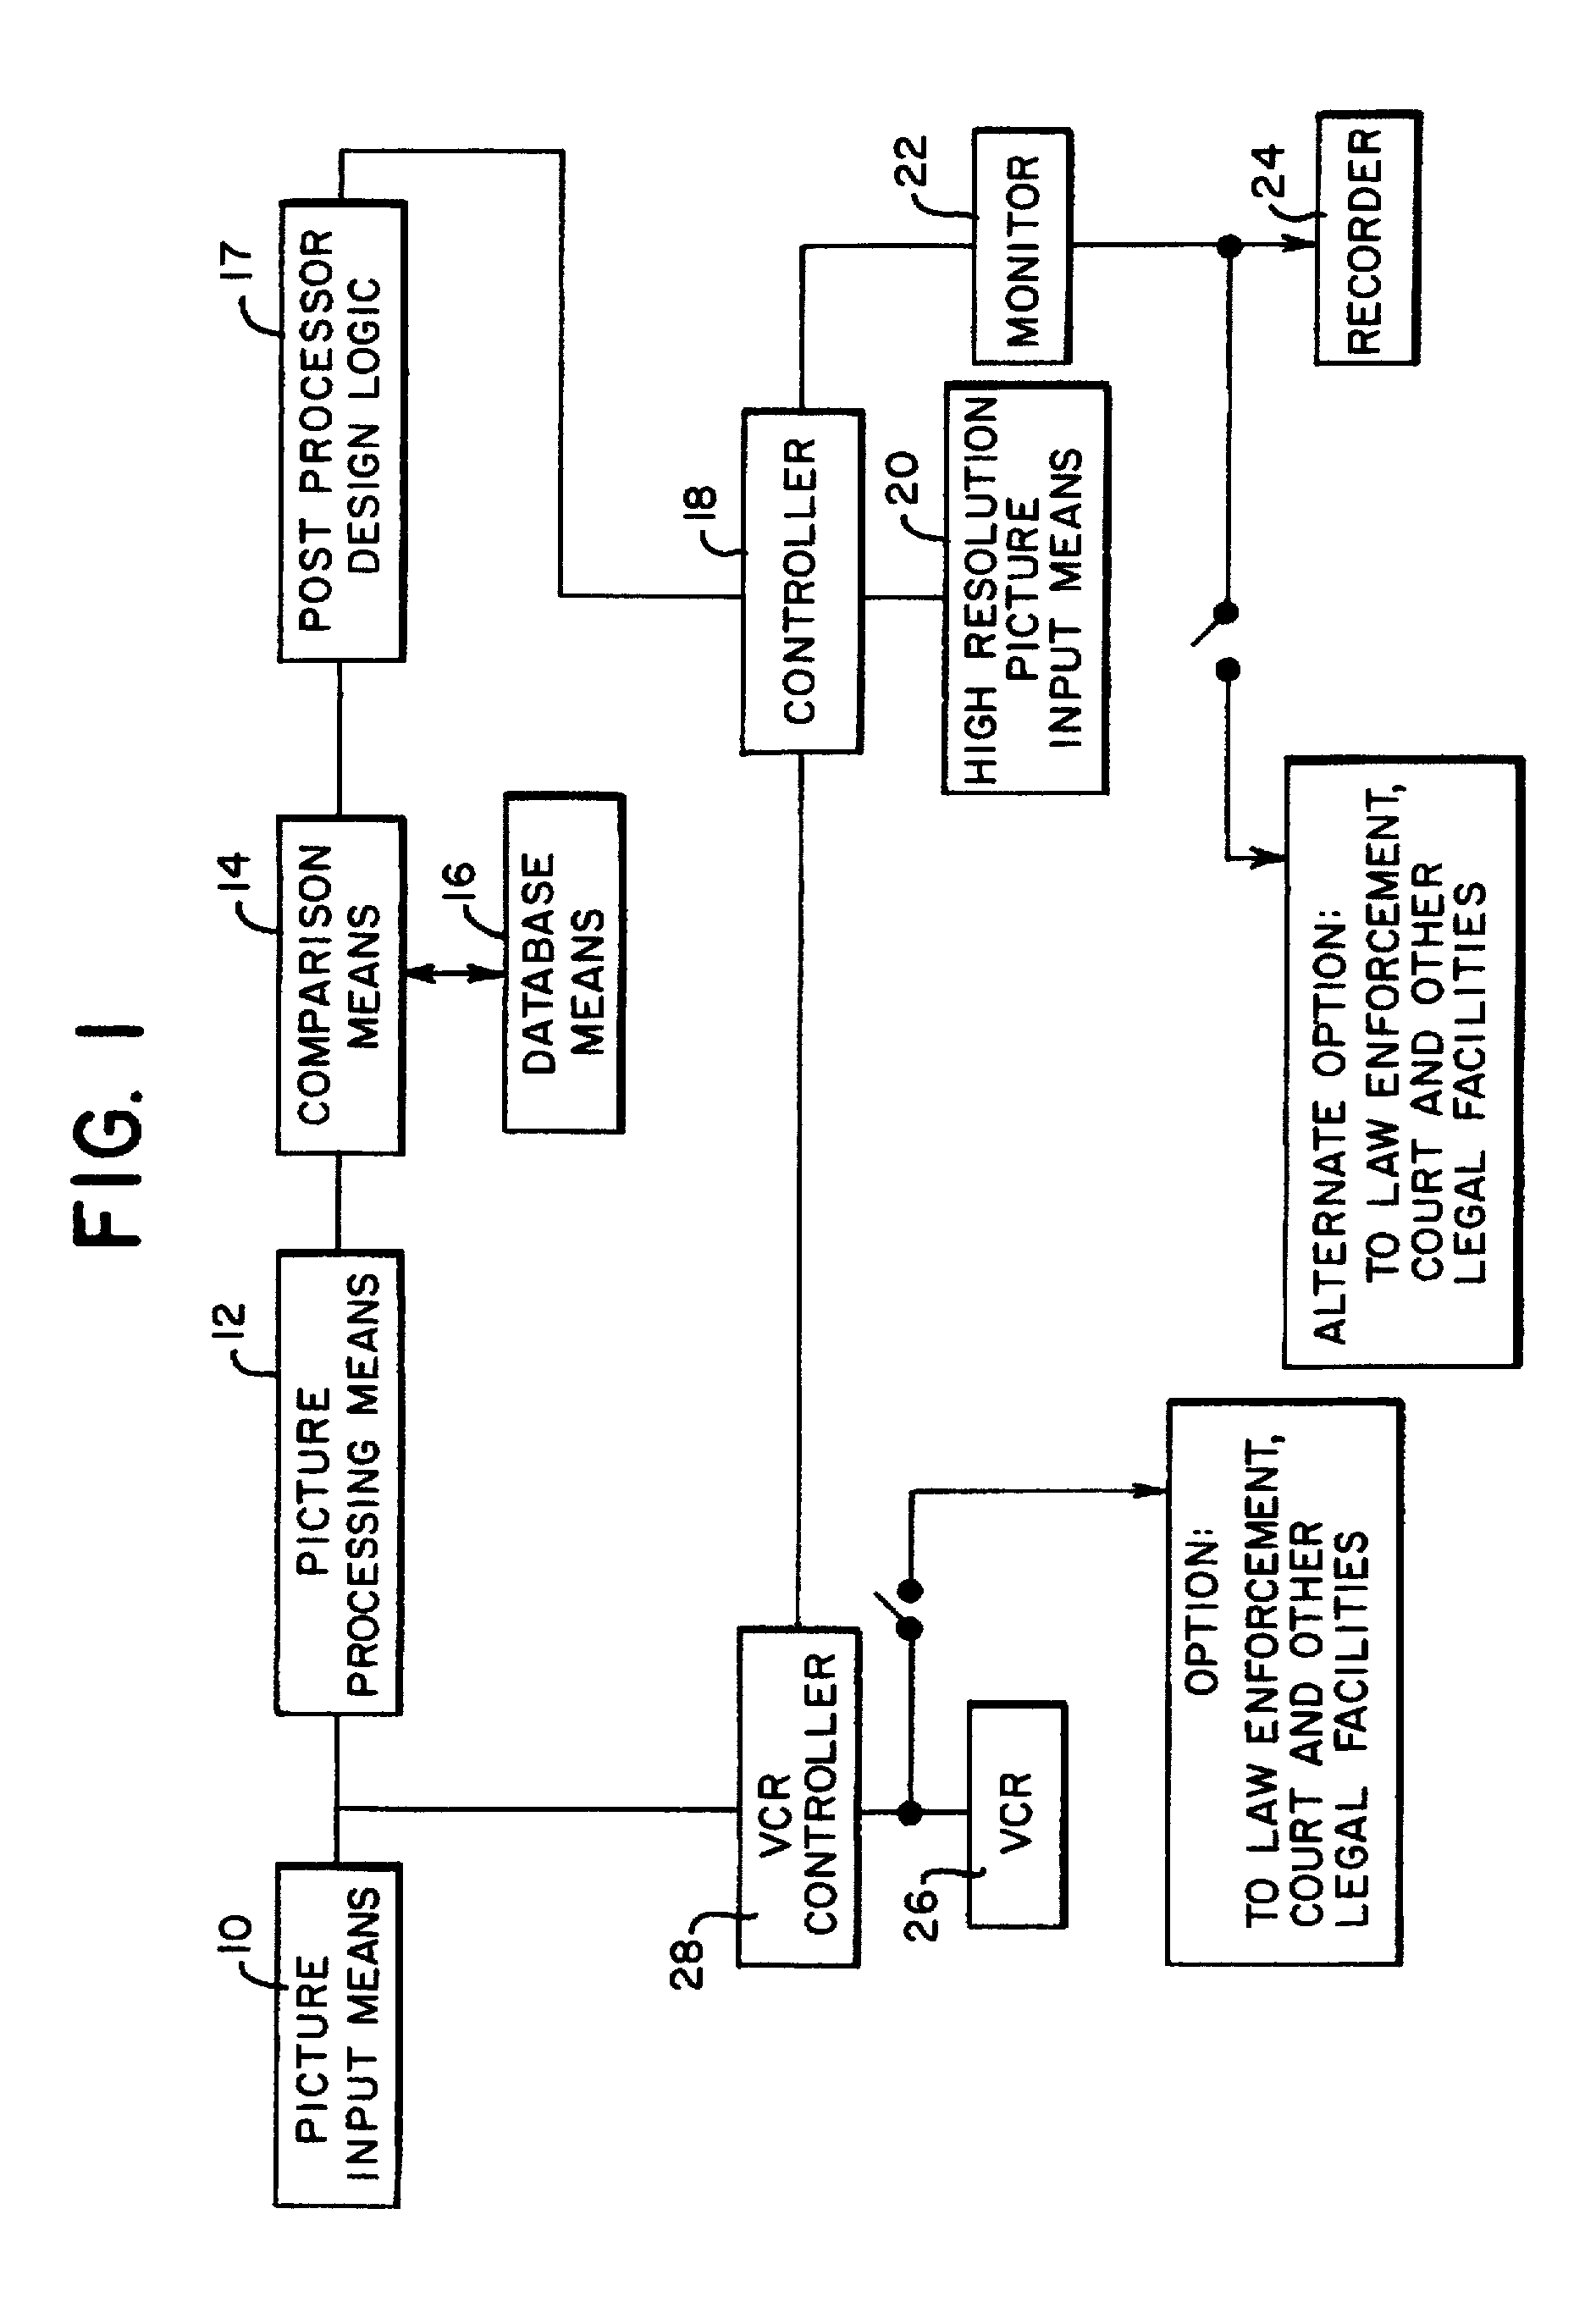 Abnormality detection and surveillance system